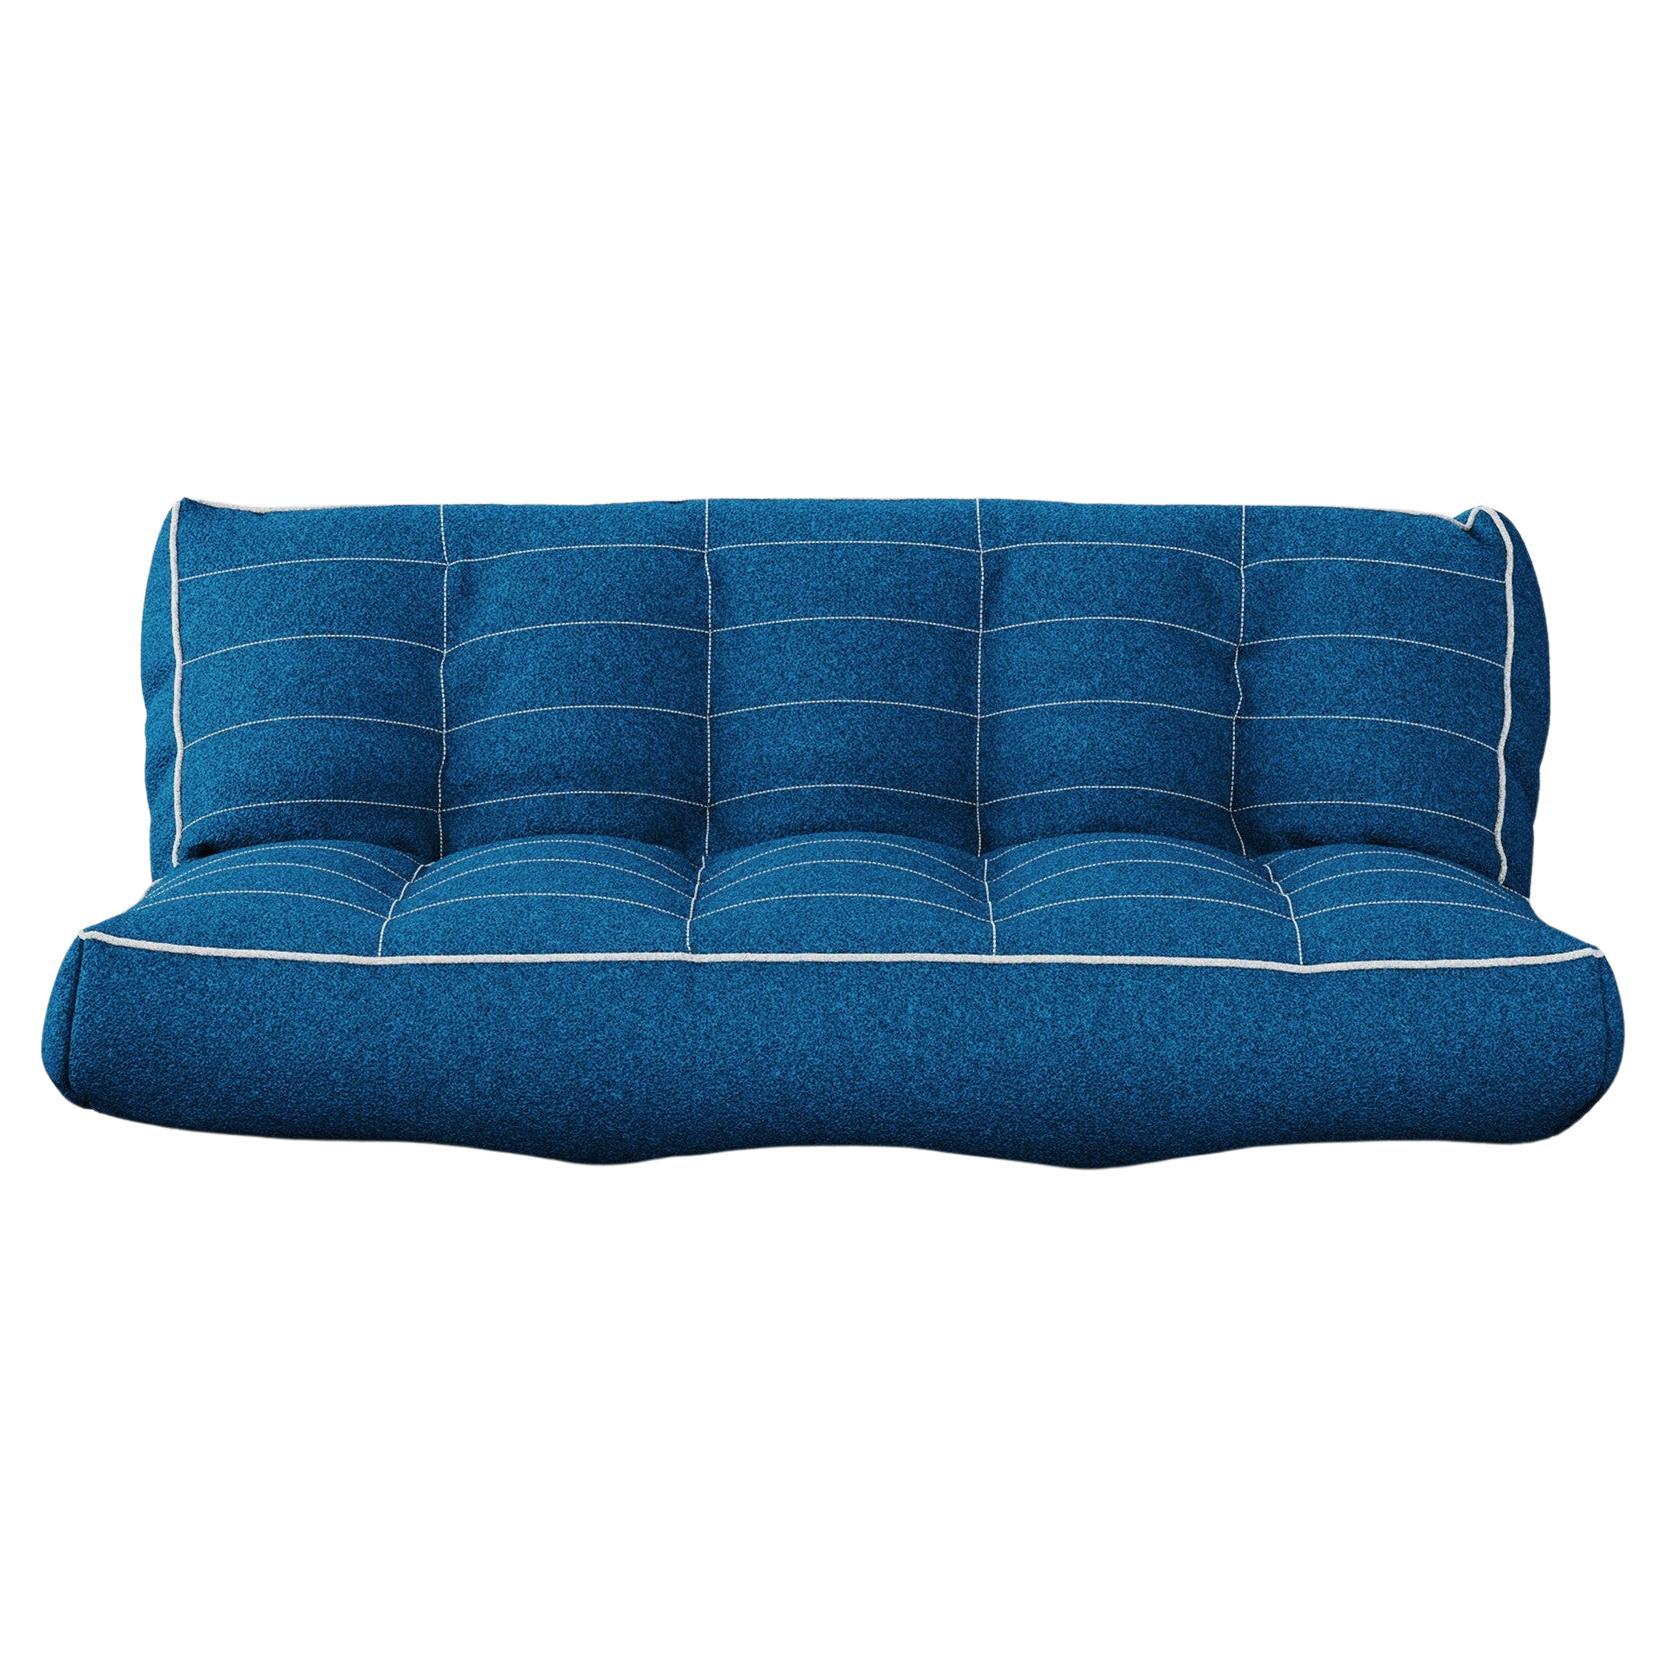 Modern Outdoor Sofa Folding Daybed Upholstered Blue Bouclé White Details For Sale